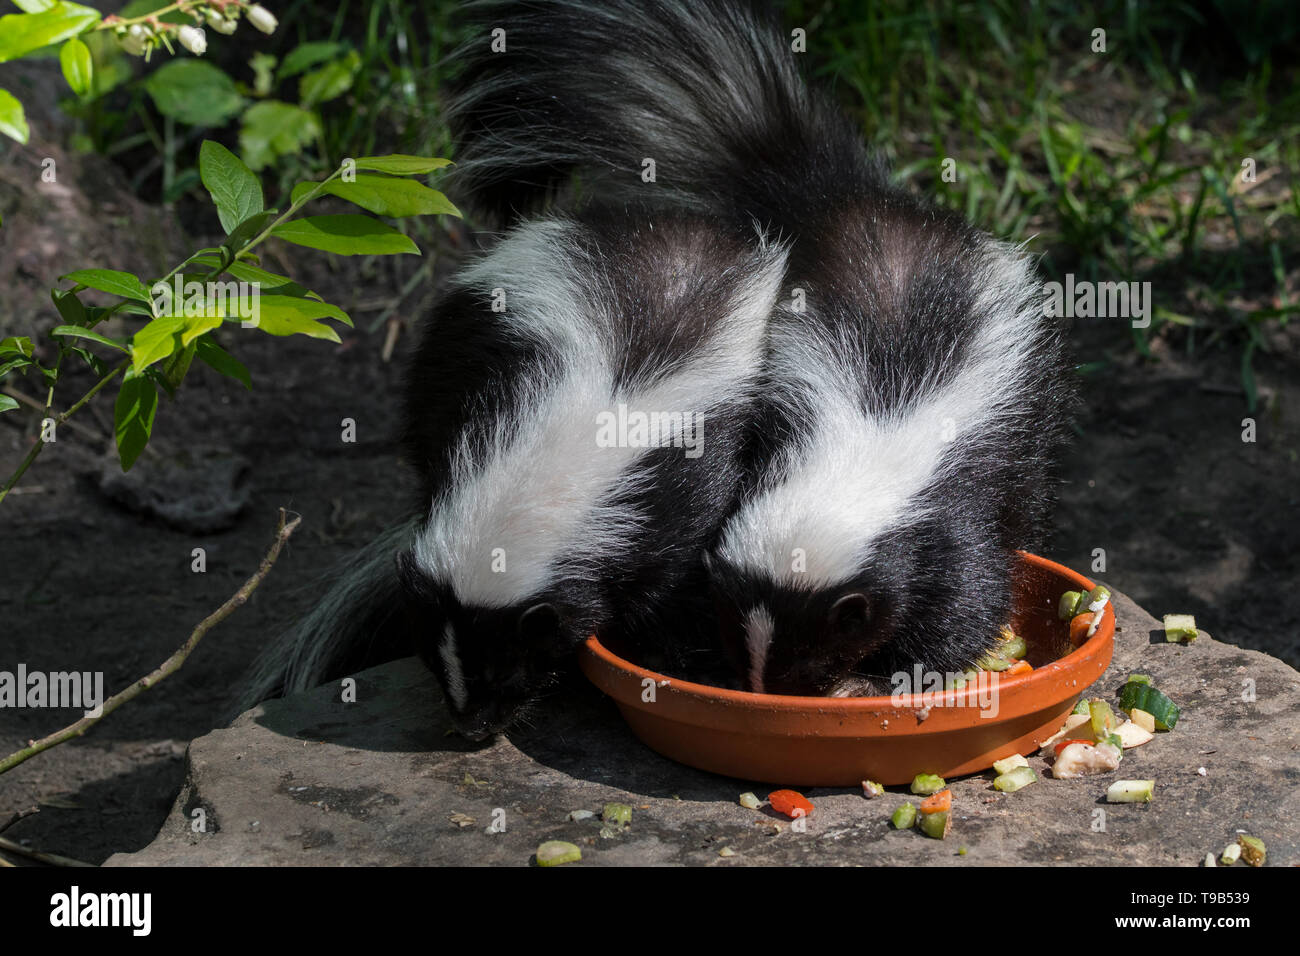 Two young striped skunks (Mephitis mephitis) eating cat food in garden at dusk Stock Photo